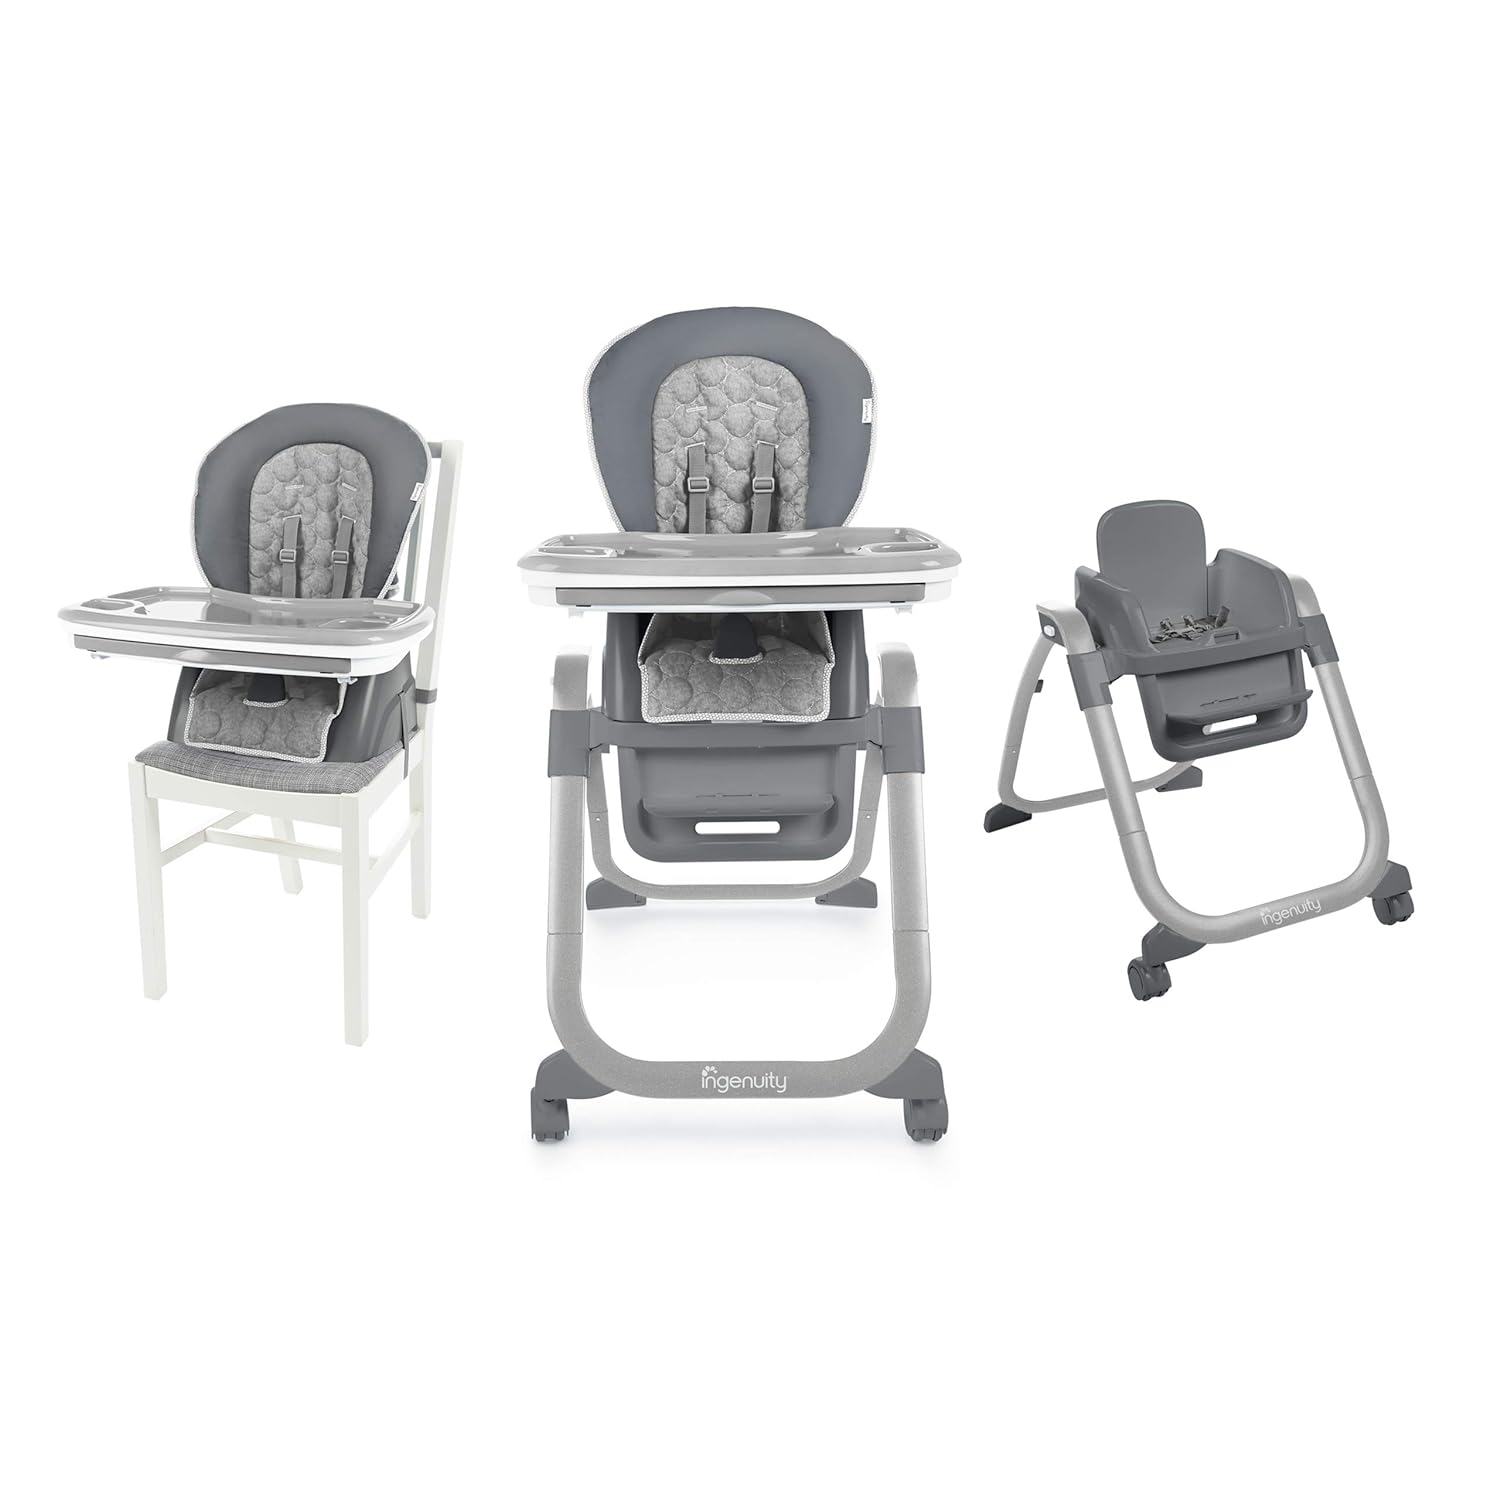 Ingenuity, Clayton 4 in 1 High Chair, Child Booster Seat, Toddler Chair or Can Be Used As A Seat For Two Children